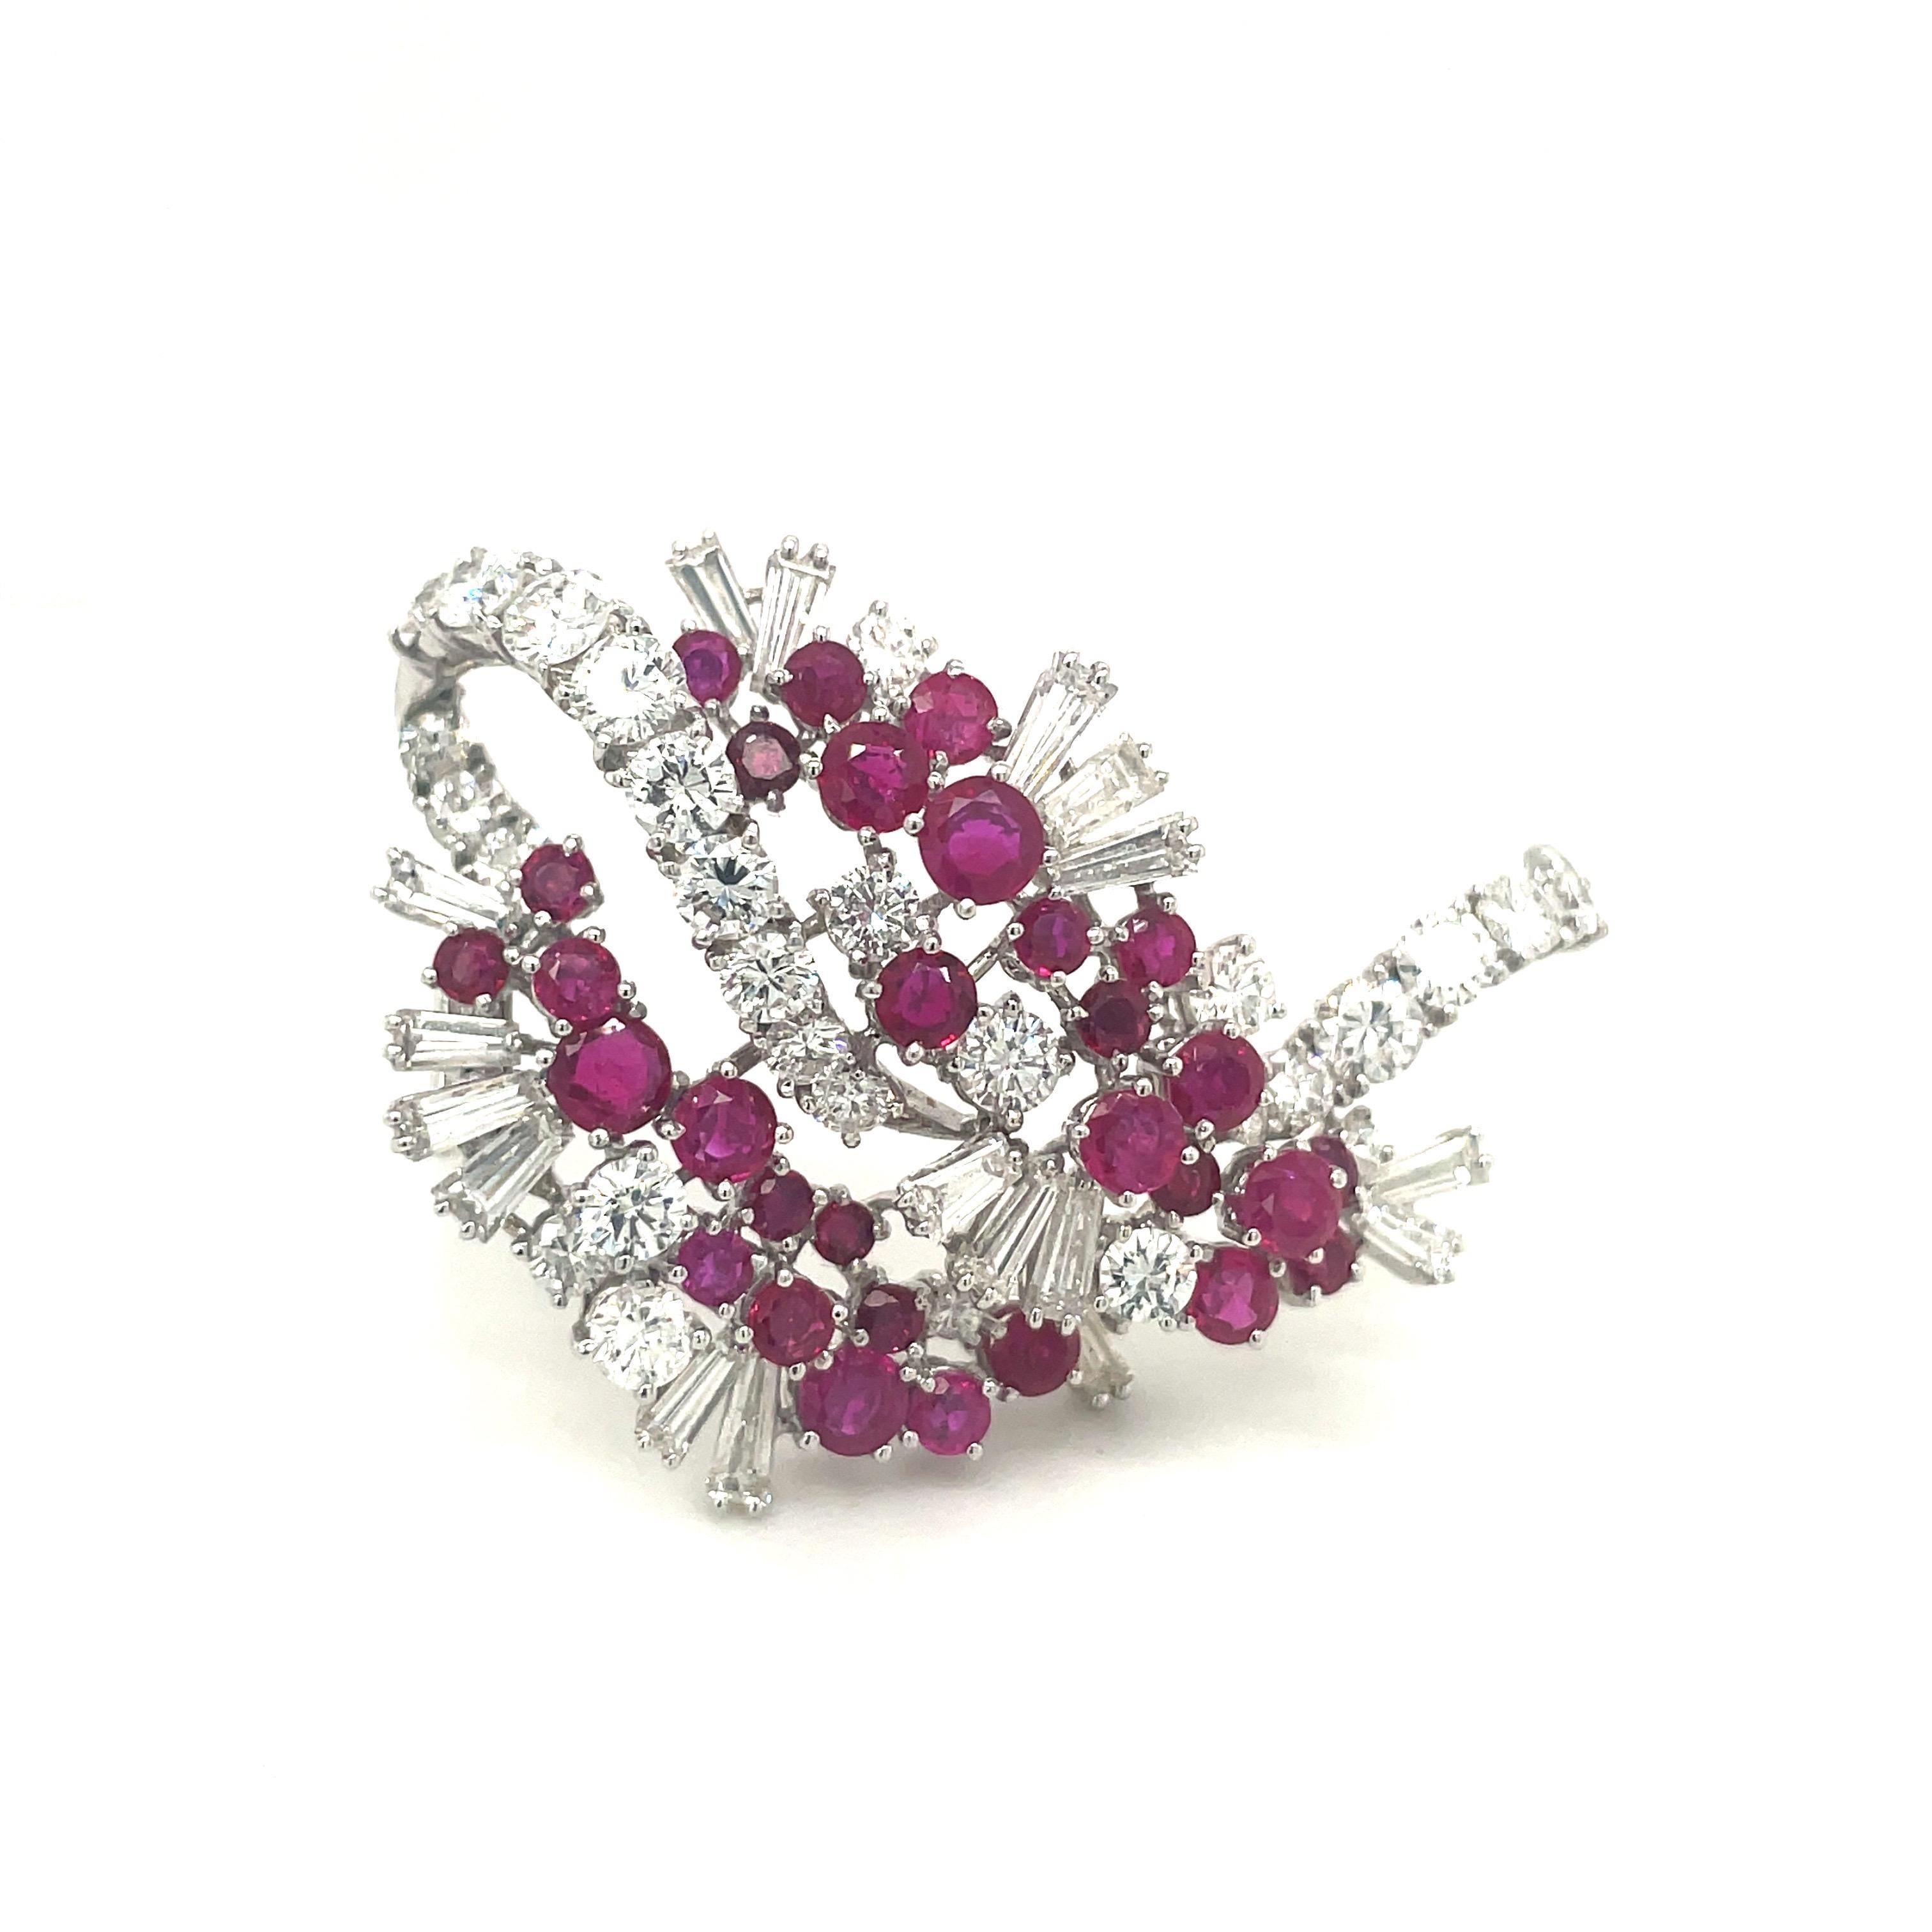 18KT White Gold 4.88Ct Ruby 6.18 Ct Round & Baguette Diamond Ribbon Brooch For Sale 1